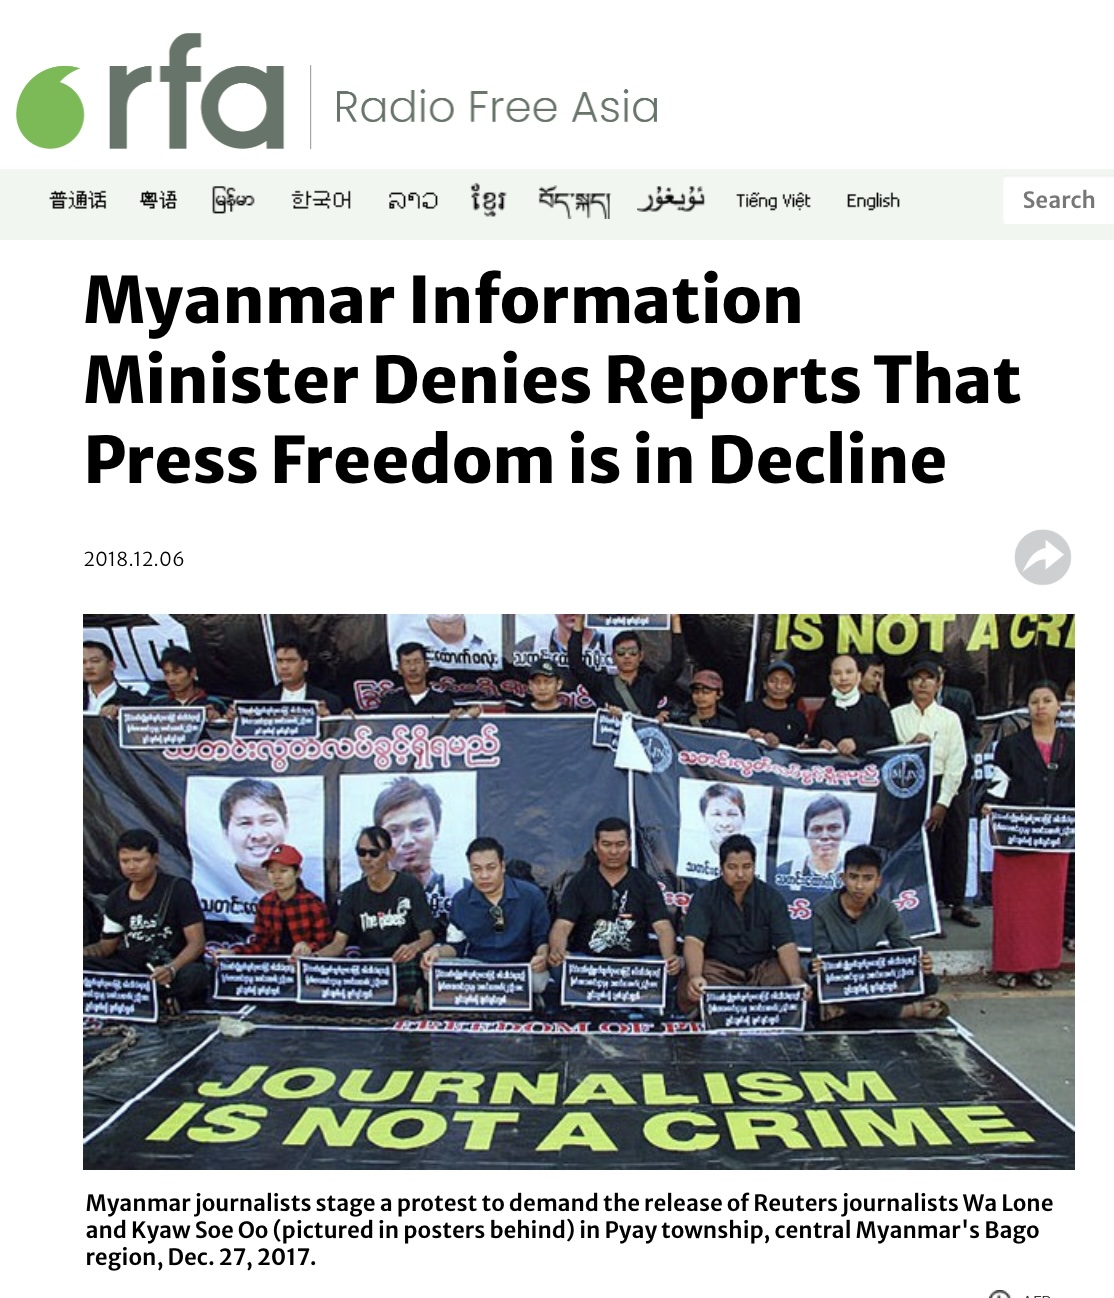 Journalists protest in Asia 